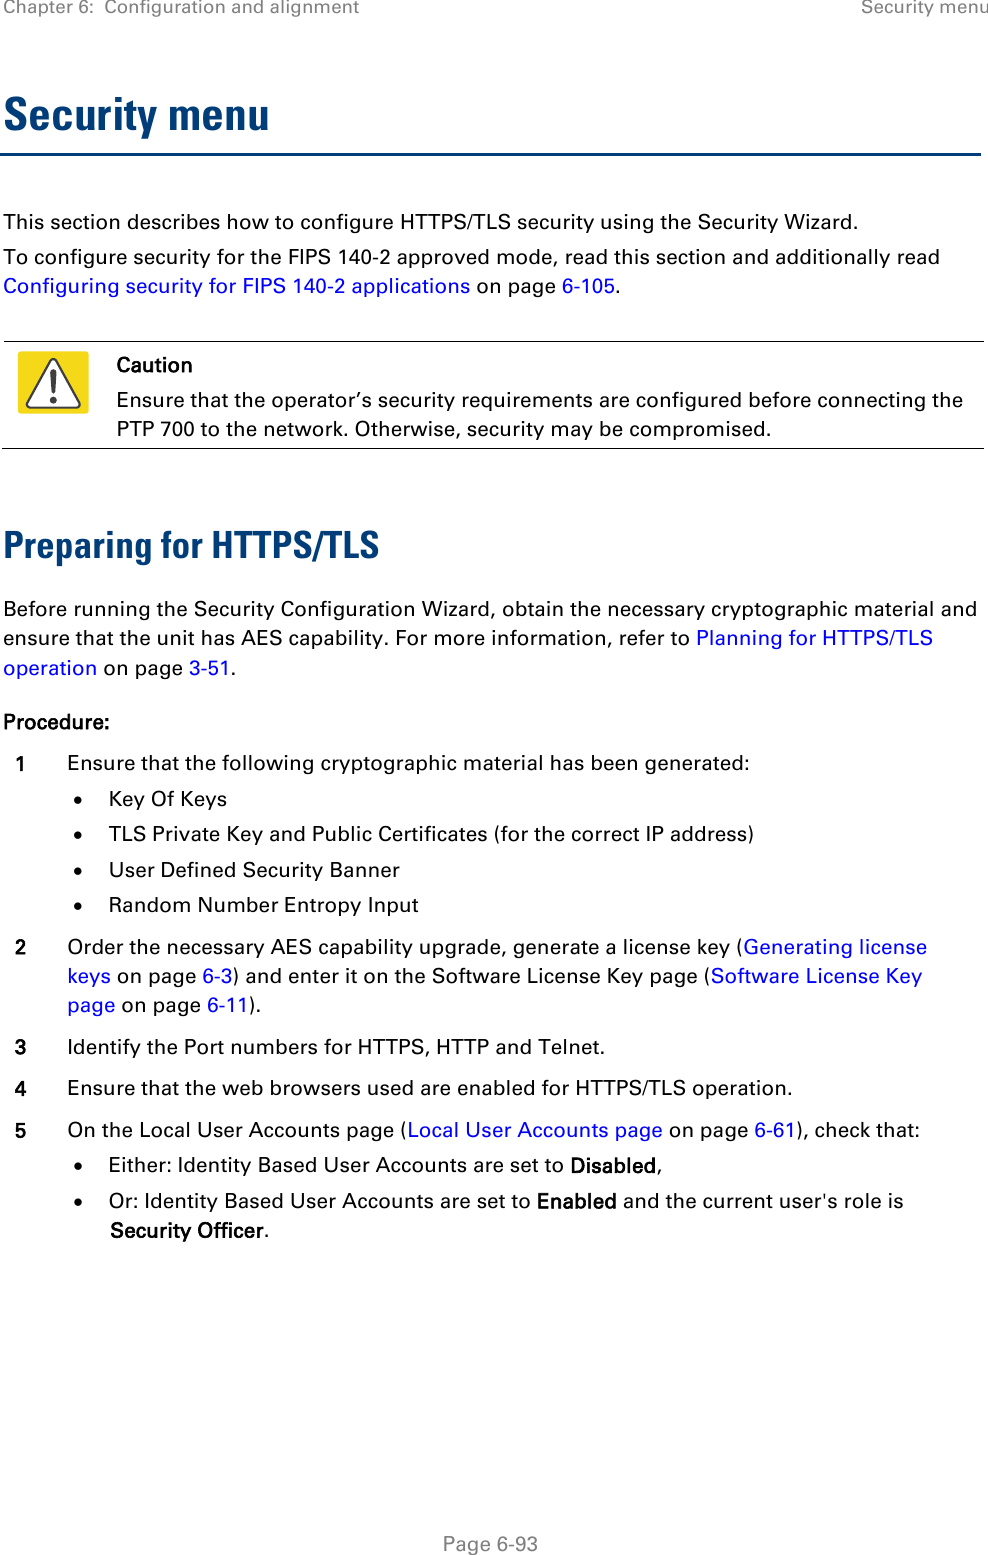 Chapter 6:  Configuration and alignment Security menu  Security menu This section describes how to configure HTTPS/TLS security using the Security Wizard. To configure security for the FIPS 140-2 approved mode, read this section and additionally read Configuring security for FIPS 140-2 applications on page 6-105.   Caution Ensure that the operator’s security requirements are configured before connecting the PTP 700 to the network. Otherwise, security may be compromised.  Preparing for HTTPS/TLS Before running the Security Configuration Wizard, obtain the necessary cryptographic material and ensure that the unit has AES capability. For more information, refer to Planning for HTTPS/TLS operation on page 3-51. Procedure: 1 Ensure that the following cryptographic material has been generated: • Key Of Keys • TLS Private Key and Public Certificates (for the correct IP address) • User Defined Security Banner • Random Number Entropy Input 2 Order the necessary AES capability upgrade, generate a license key (Generating license keys on page 6-3) and enter it on the Software License Key page (Software License Key page on page 6-11). 3 Identify the Port numbers for HTTPS, HTTP and Telnet. 4 Ensure that the web browsers used are enabled for HTTPS/TLS operation. 5 On the Local User Accounts page (Local User Accounts page on page 6-61), check that: • Either: Identity Based User Accounts are set to Disabled, • Or: Identity Based User Accounts are set to Enabled and the current user&apos;s role is Security Officer.   Page 6-93 